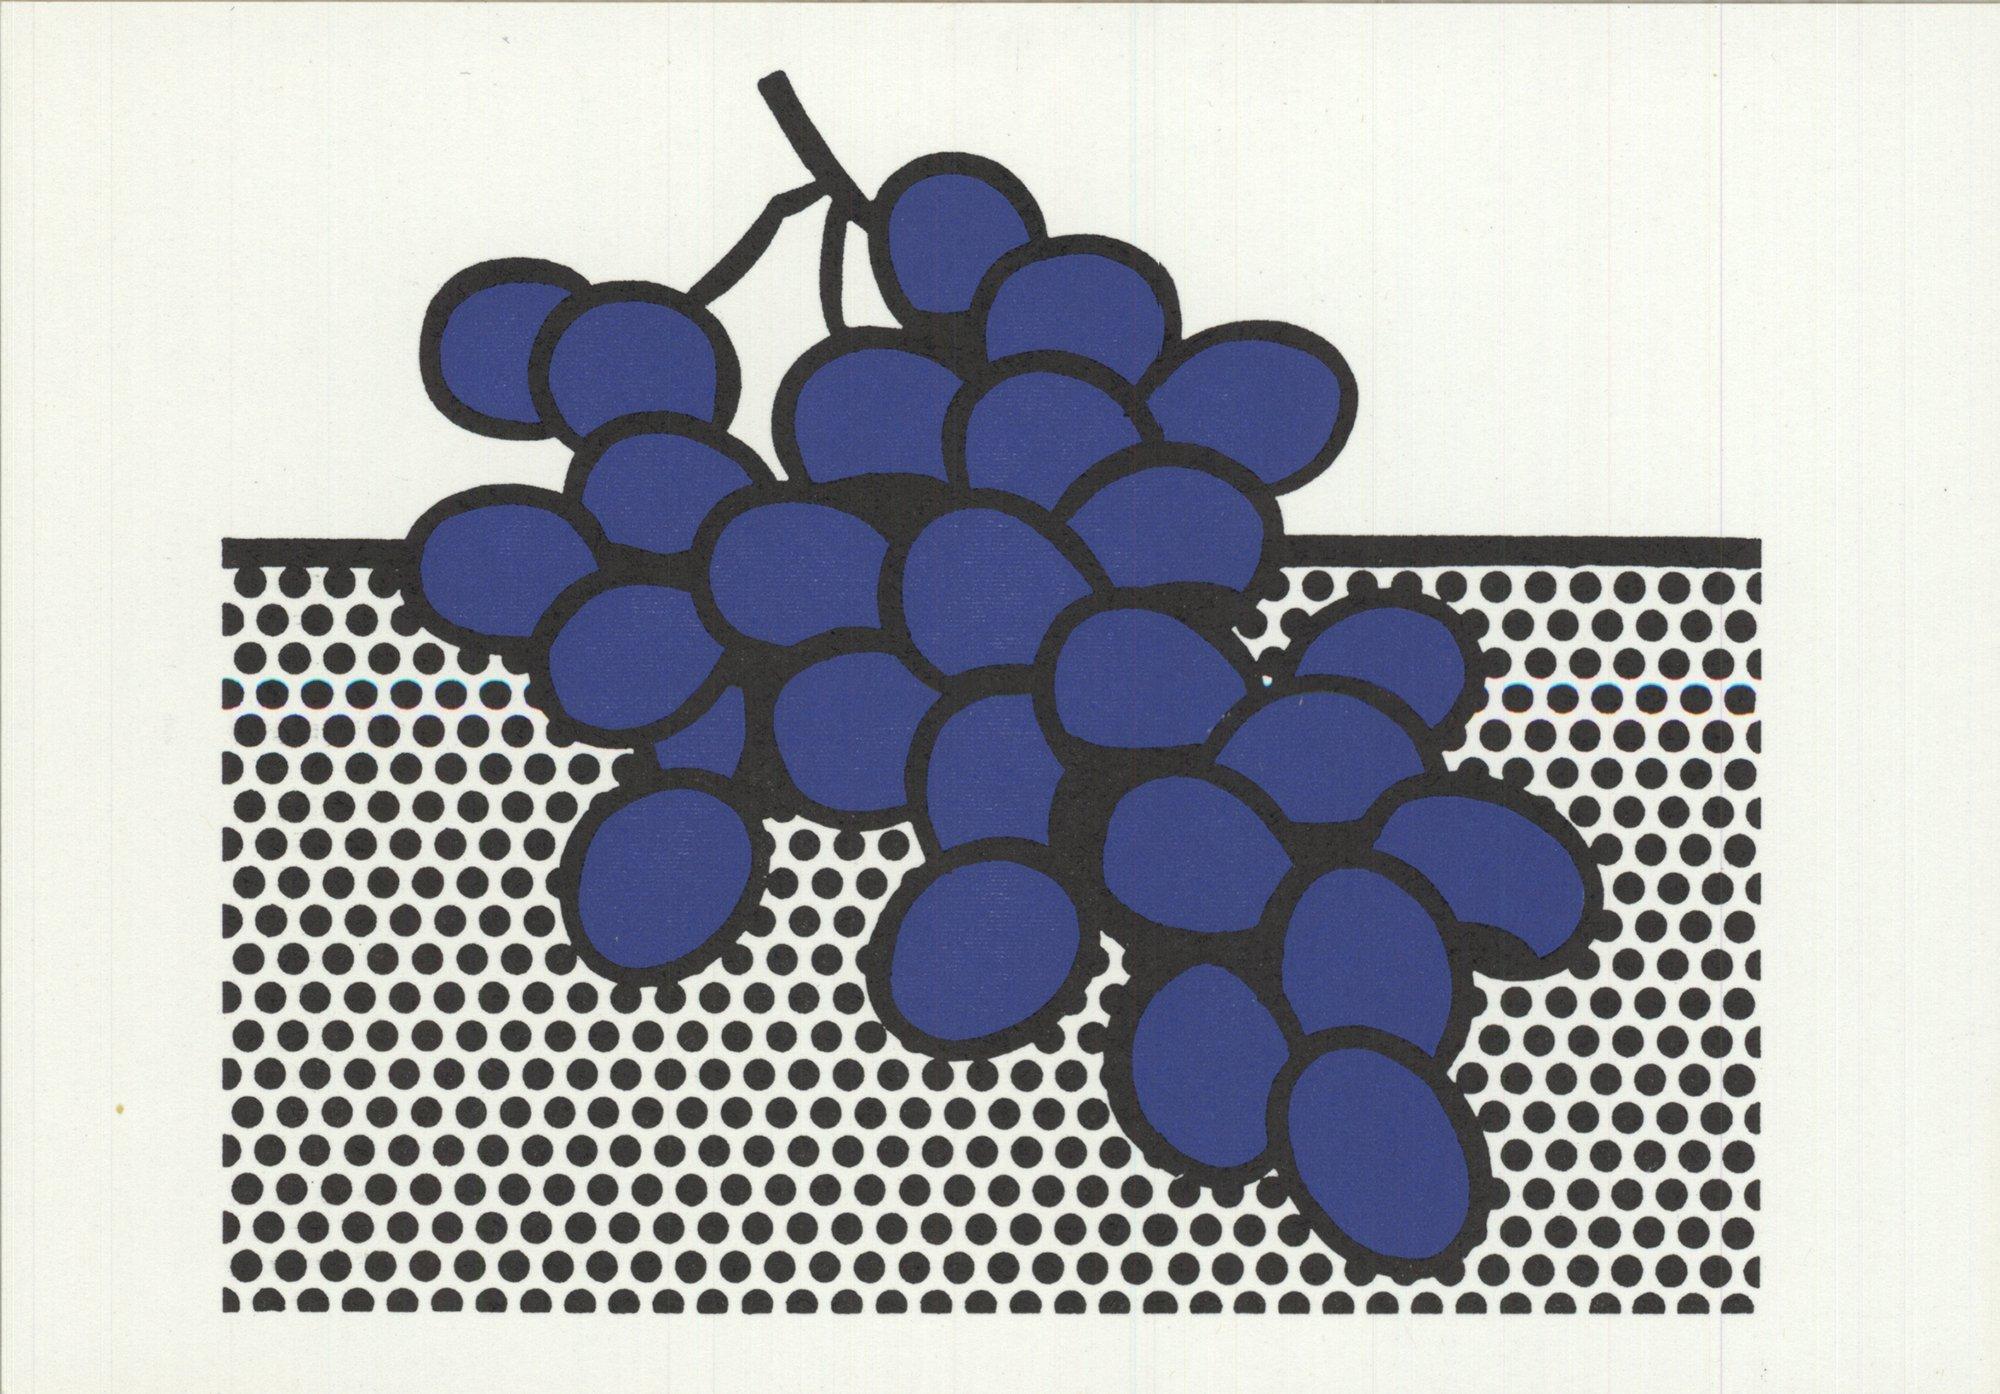 Paper Size: 4.25 x 6 inches ( 10.795 x 15.24 cm )
 Image Size: 4 x 4.5 inches ( 10.16 x 11.43 cm )
 Framed: No
 Condition: A: Mint
 
 Additional Details: Authentic lithograph from Gallery Beyeler. Published by Nouvelles Images editeurs.
 
 Shipping